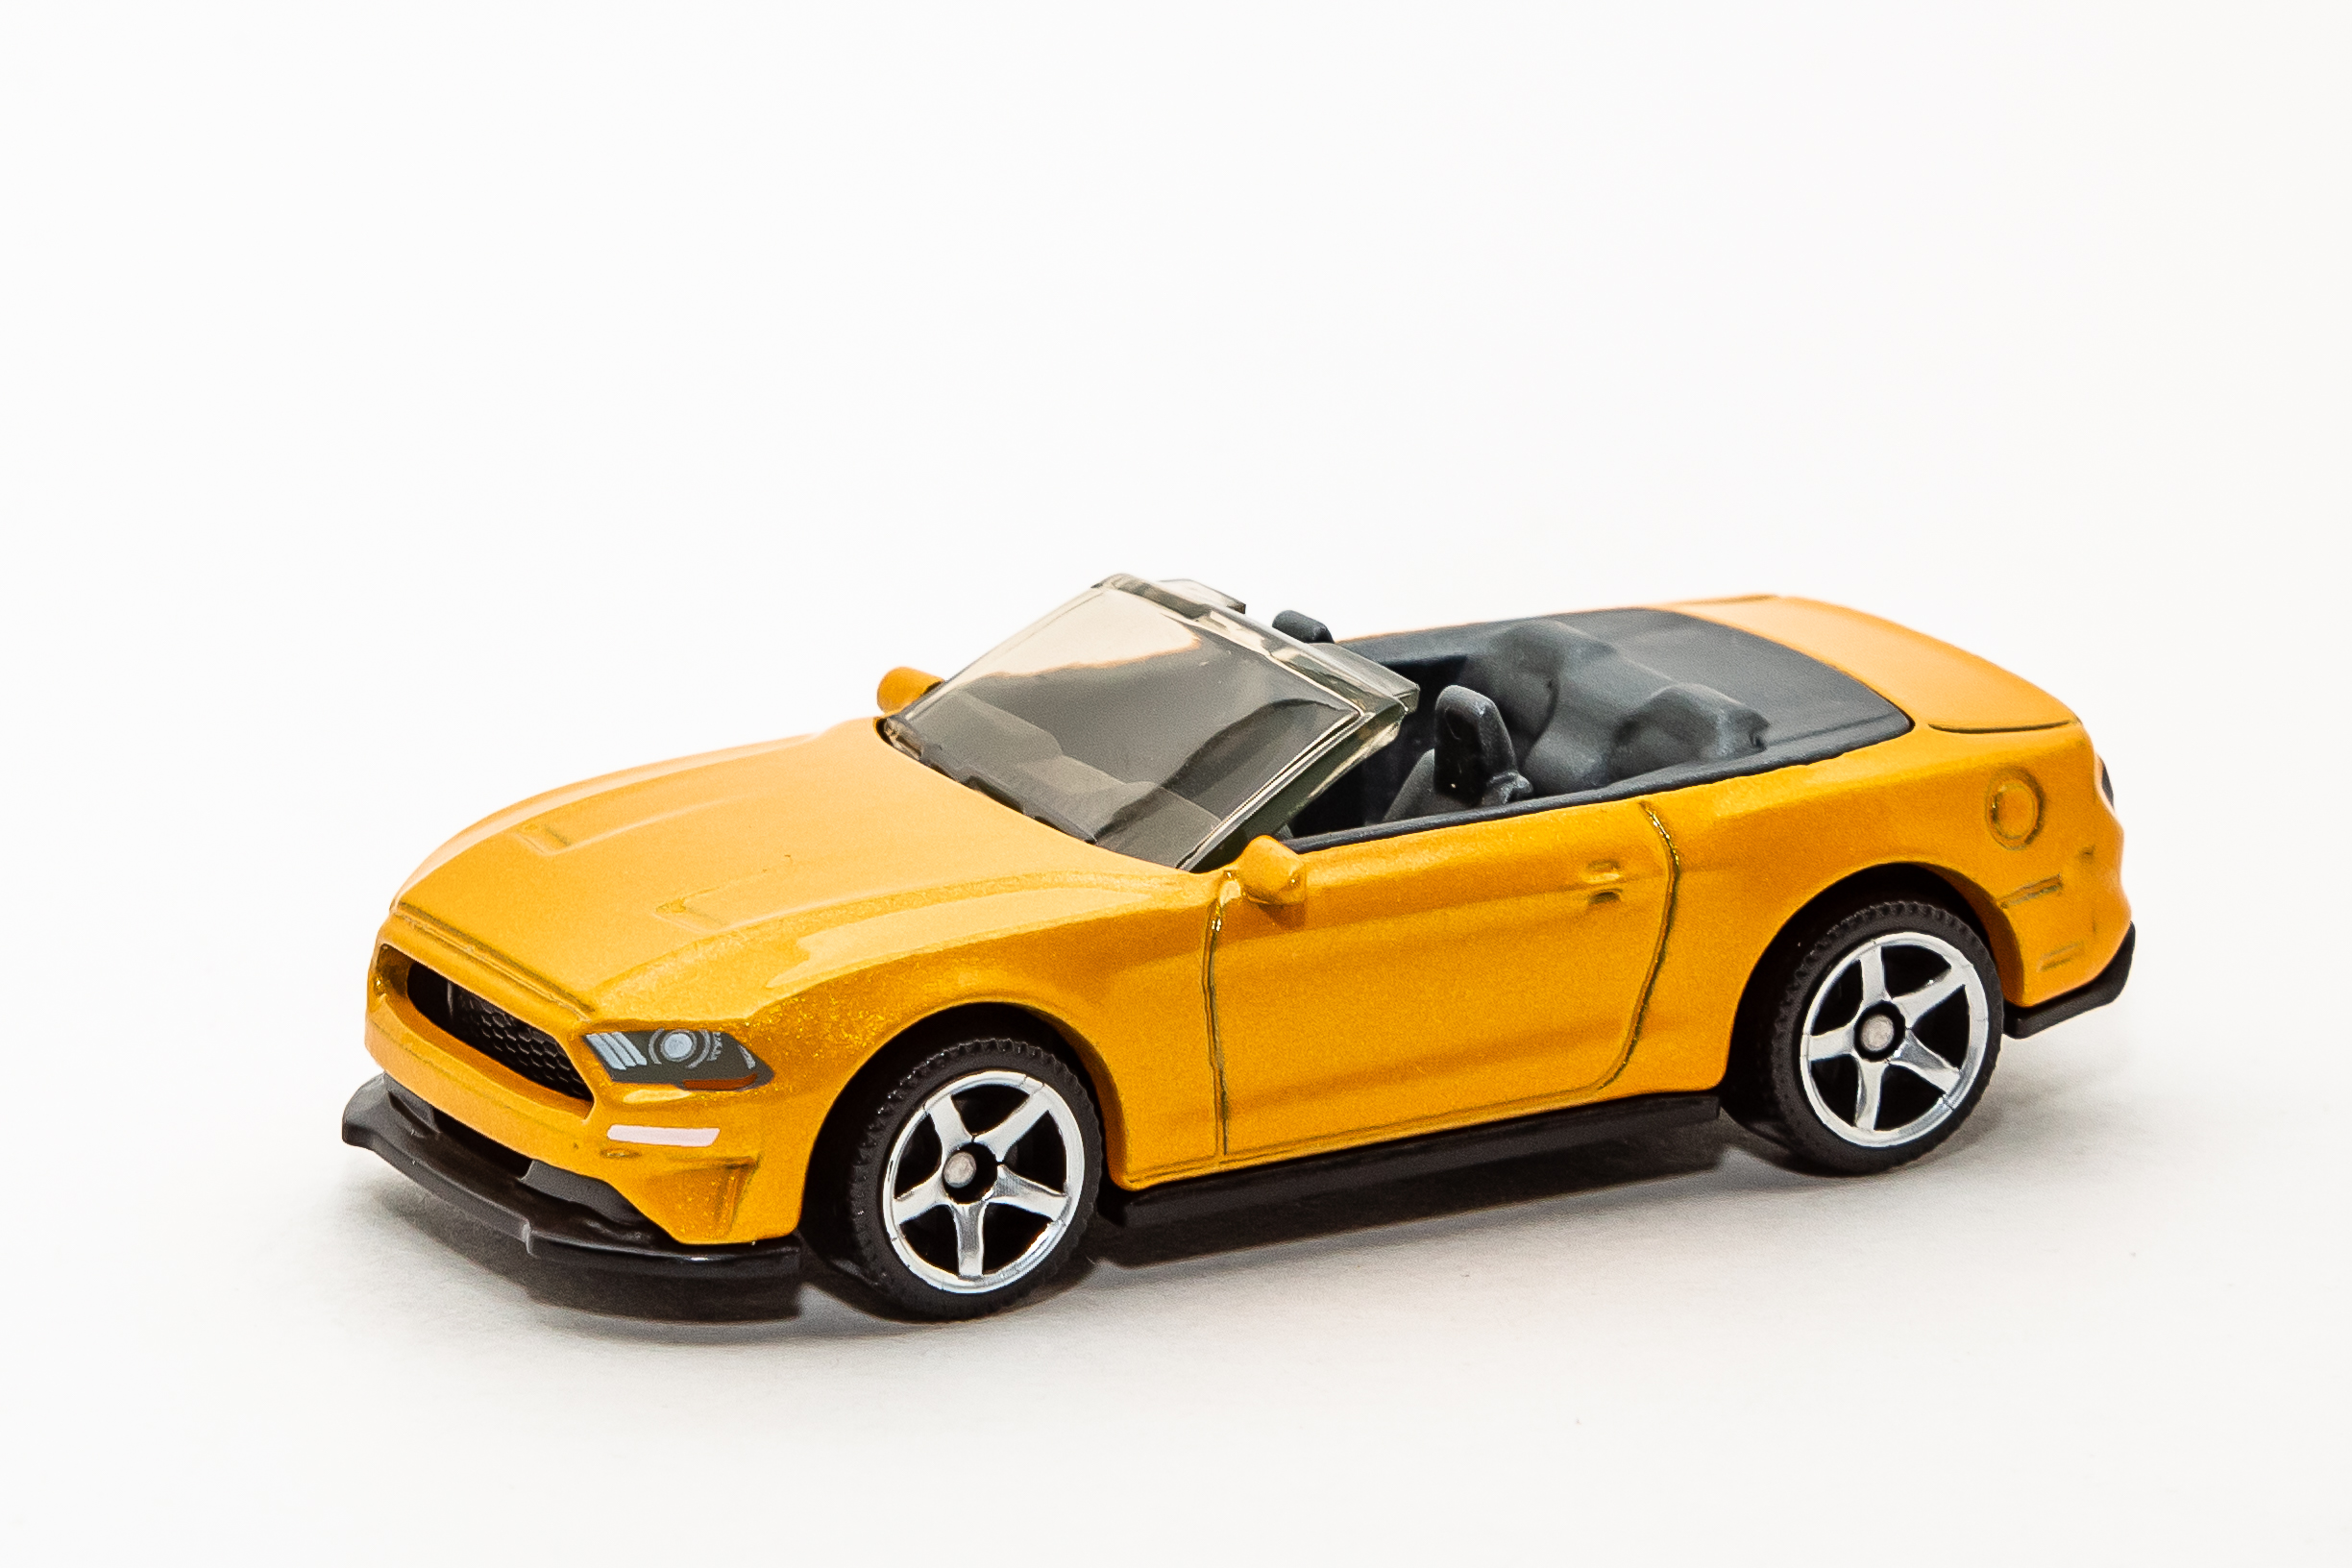 2020 Matchbox  Mustang Series  Red  '18 FORD MUSTANG CONVERTIBLE  MB16-021520 